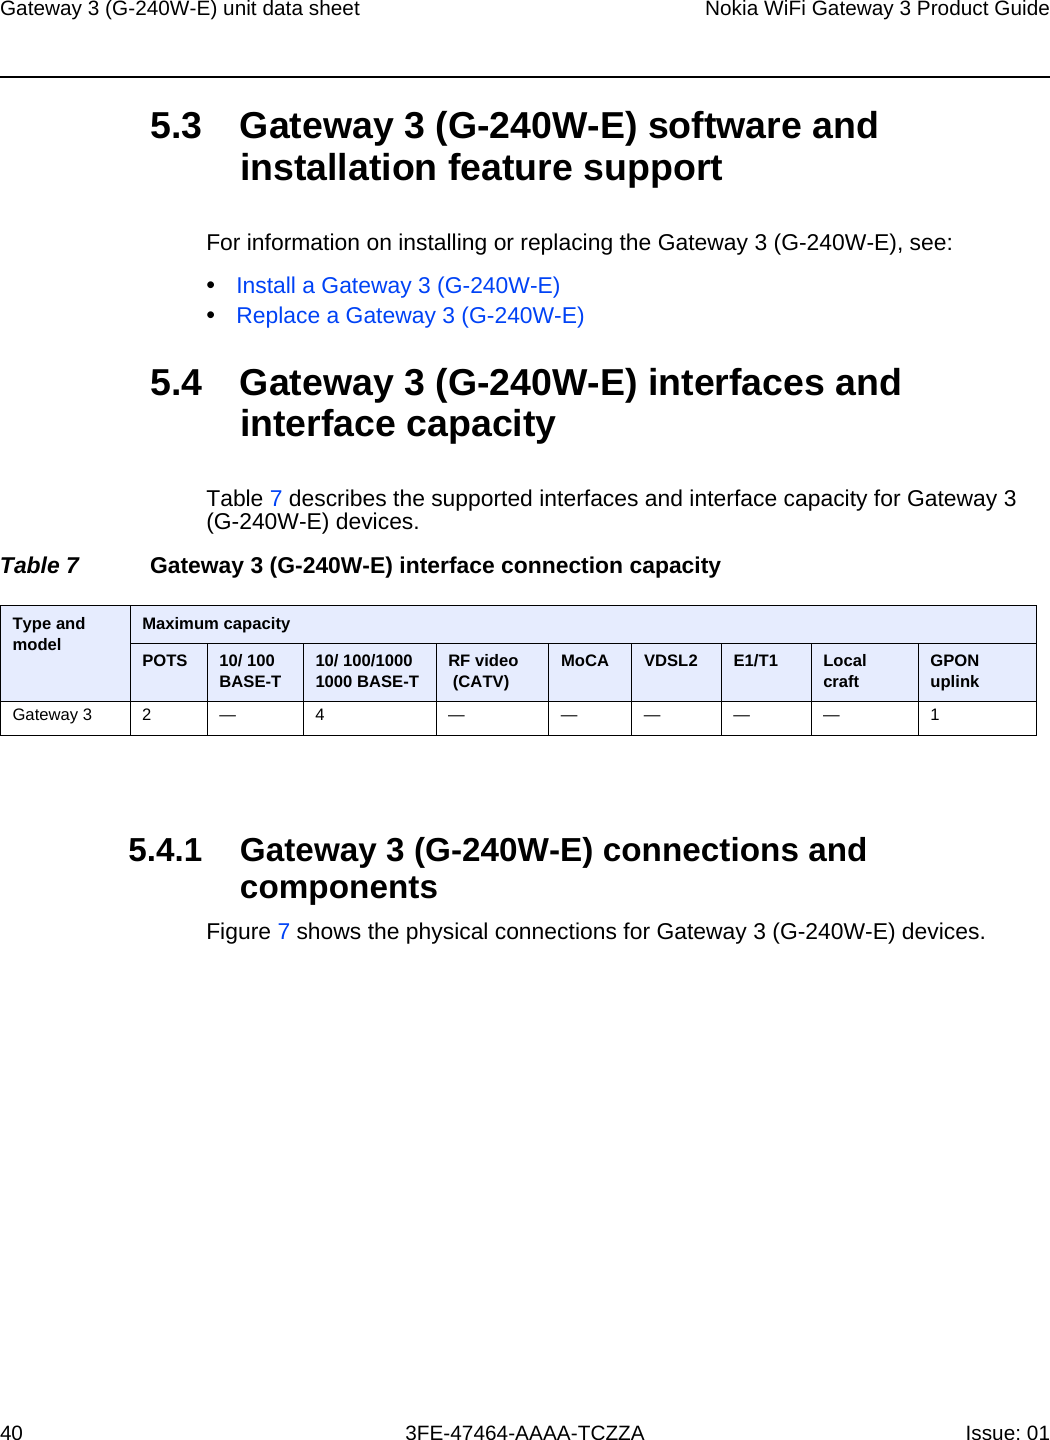 Gateway 3 (G-240W-E) unit data sheet40Nokia WiFi Gateway 3 Product Guide3FE-47464-AAAA-TCZZA Issue: 01 5.3 Gateway 3 (G-240W-E) software and installation feature supportFor information on installing or replacing the Gateway 3 (G-240W-E), see:•Install a Gateway 3 (G-240W-E)•Replace a Gateway 3 (G-240W-E)5.4 Gateway 3 (G-240W-E) interfaces and interface capacityTable 7 describes the supported interfaces and interface capacity for Gateway 3 (G-240W-E) devices.Table 7 Gateway 3 (G-240W-E) interface connection capacity5.4.1 Gateway 3 (G-240W-E) connections and componentsFigure 7 shows the physical connections for Gateway 3 (G-240W-E) devices.Type and model  Maximum capacityPOTS 10/ 100BASE-T 10/ 100/1000 1000 BASE-T RF video (CATV) MoCA VDSL2 E1/T1 Local craft GPON uplinkGateway 3 2 — 4 — — — — — 1